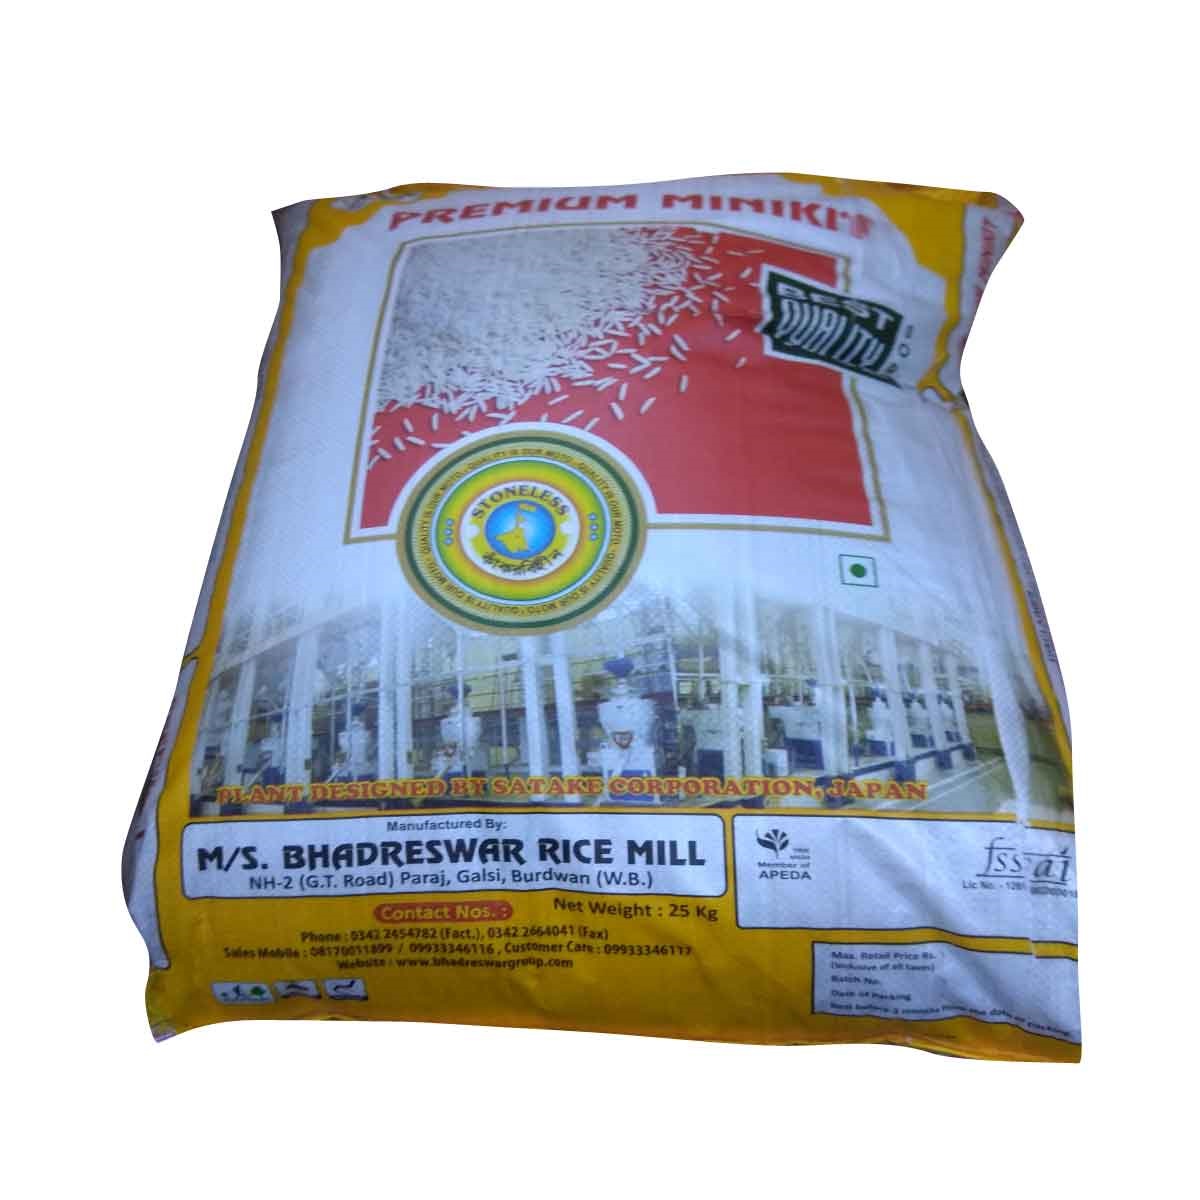 MINIKET RICE SPECIAL ( LALBABA GROUP ) - 25 KG